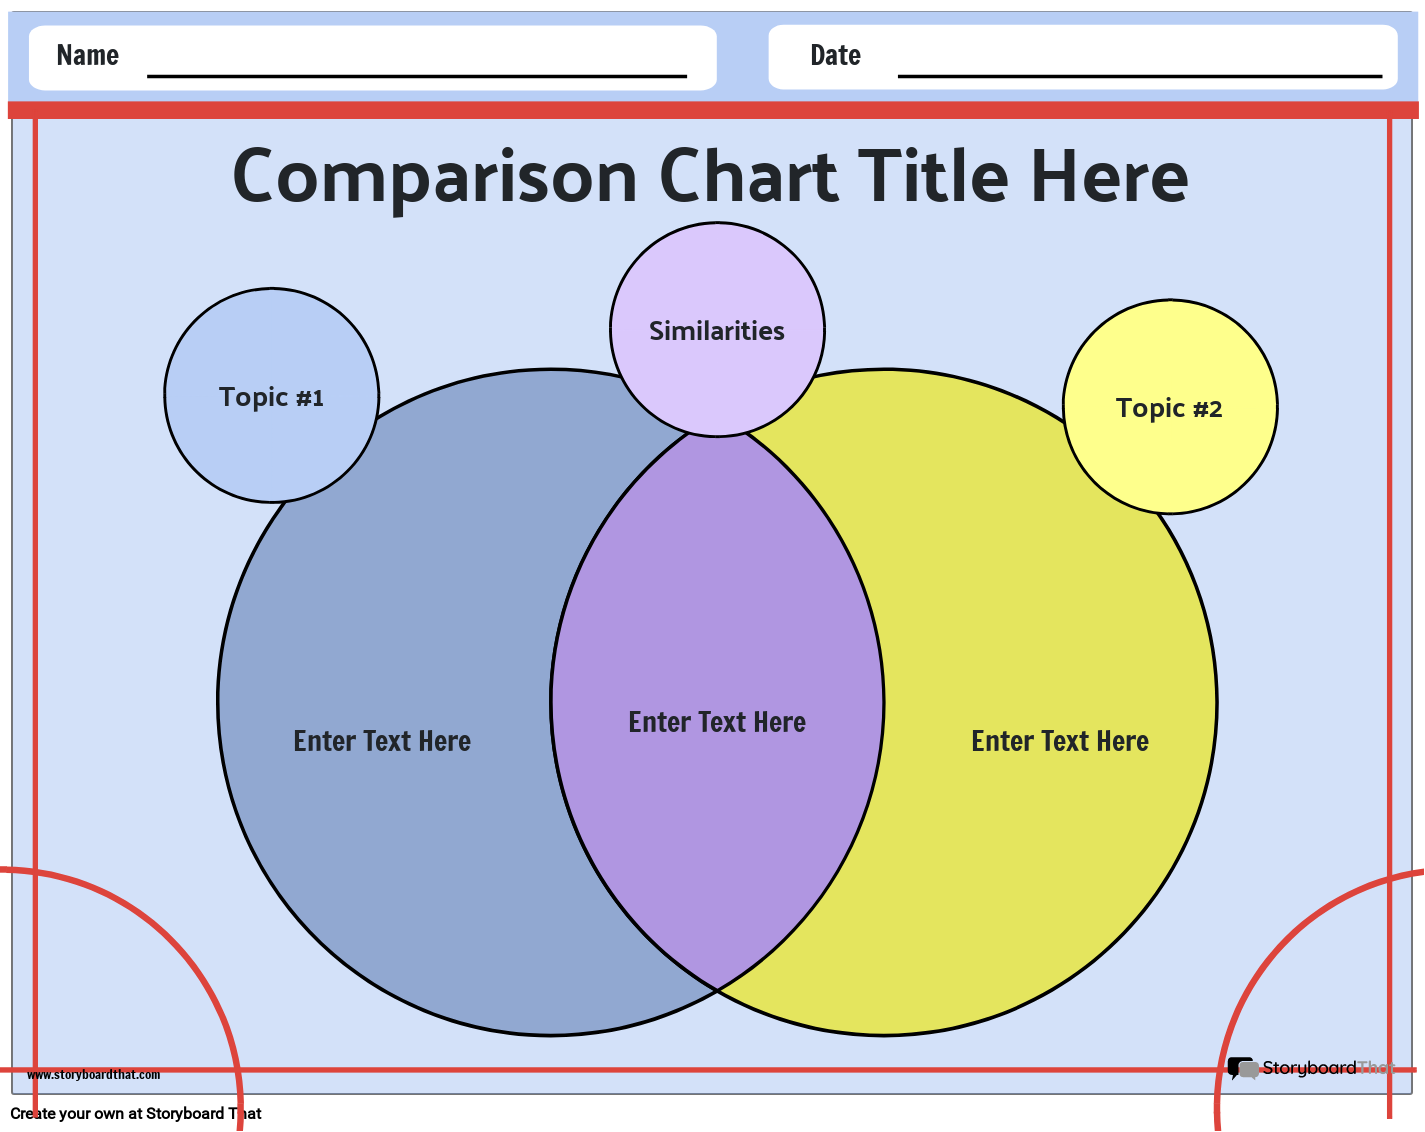 Comparison Chart Template with Yellow and Blue Theme